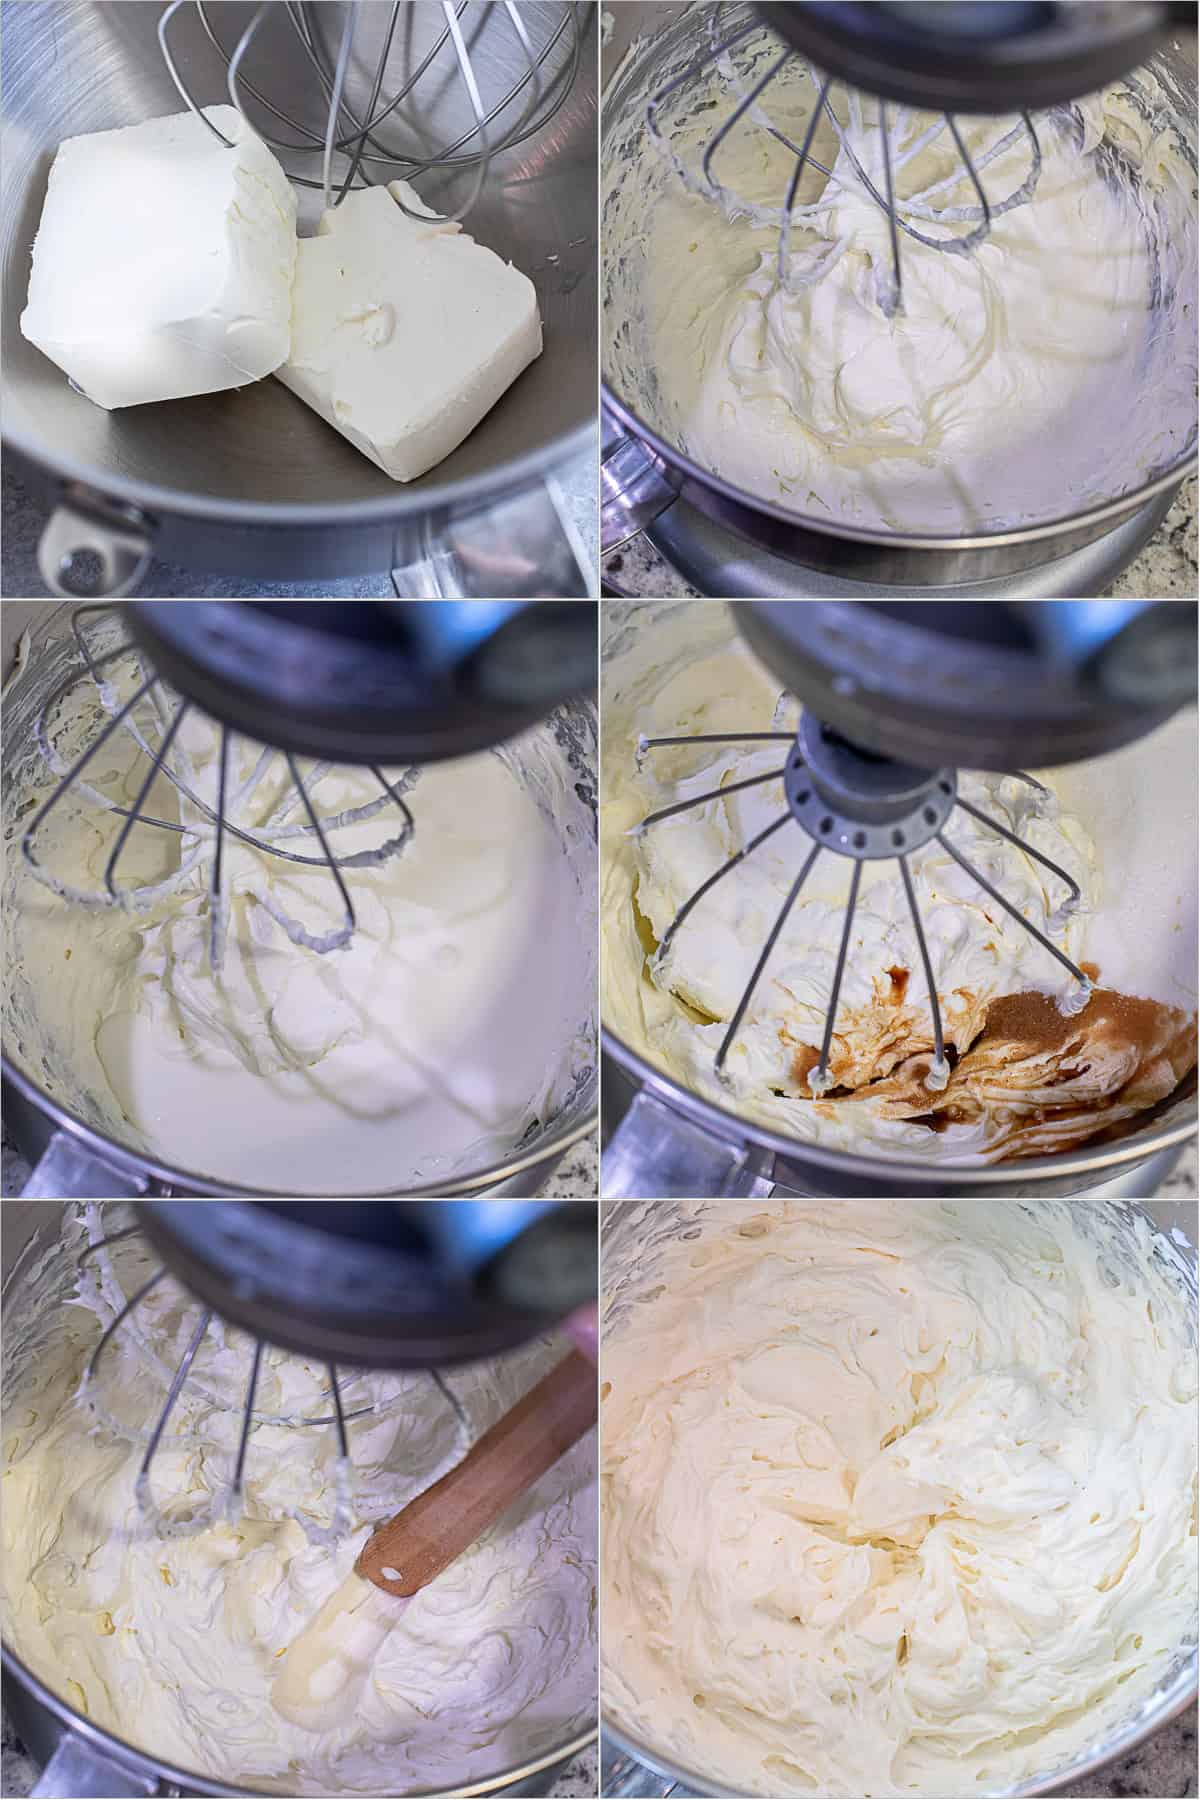 Step by step process of making the Chantilly Cream Frosting